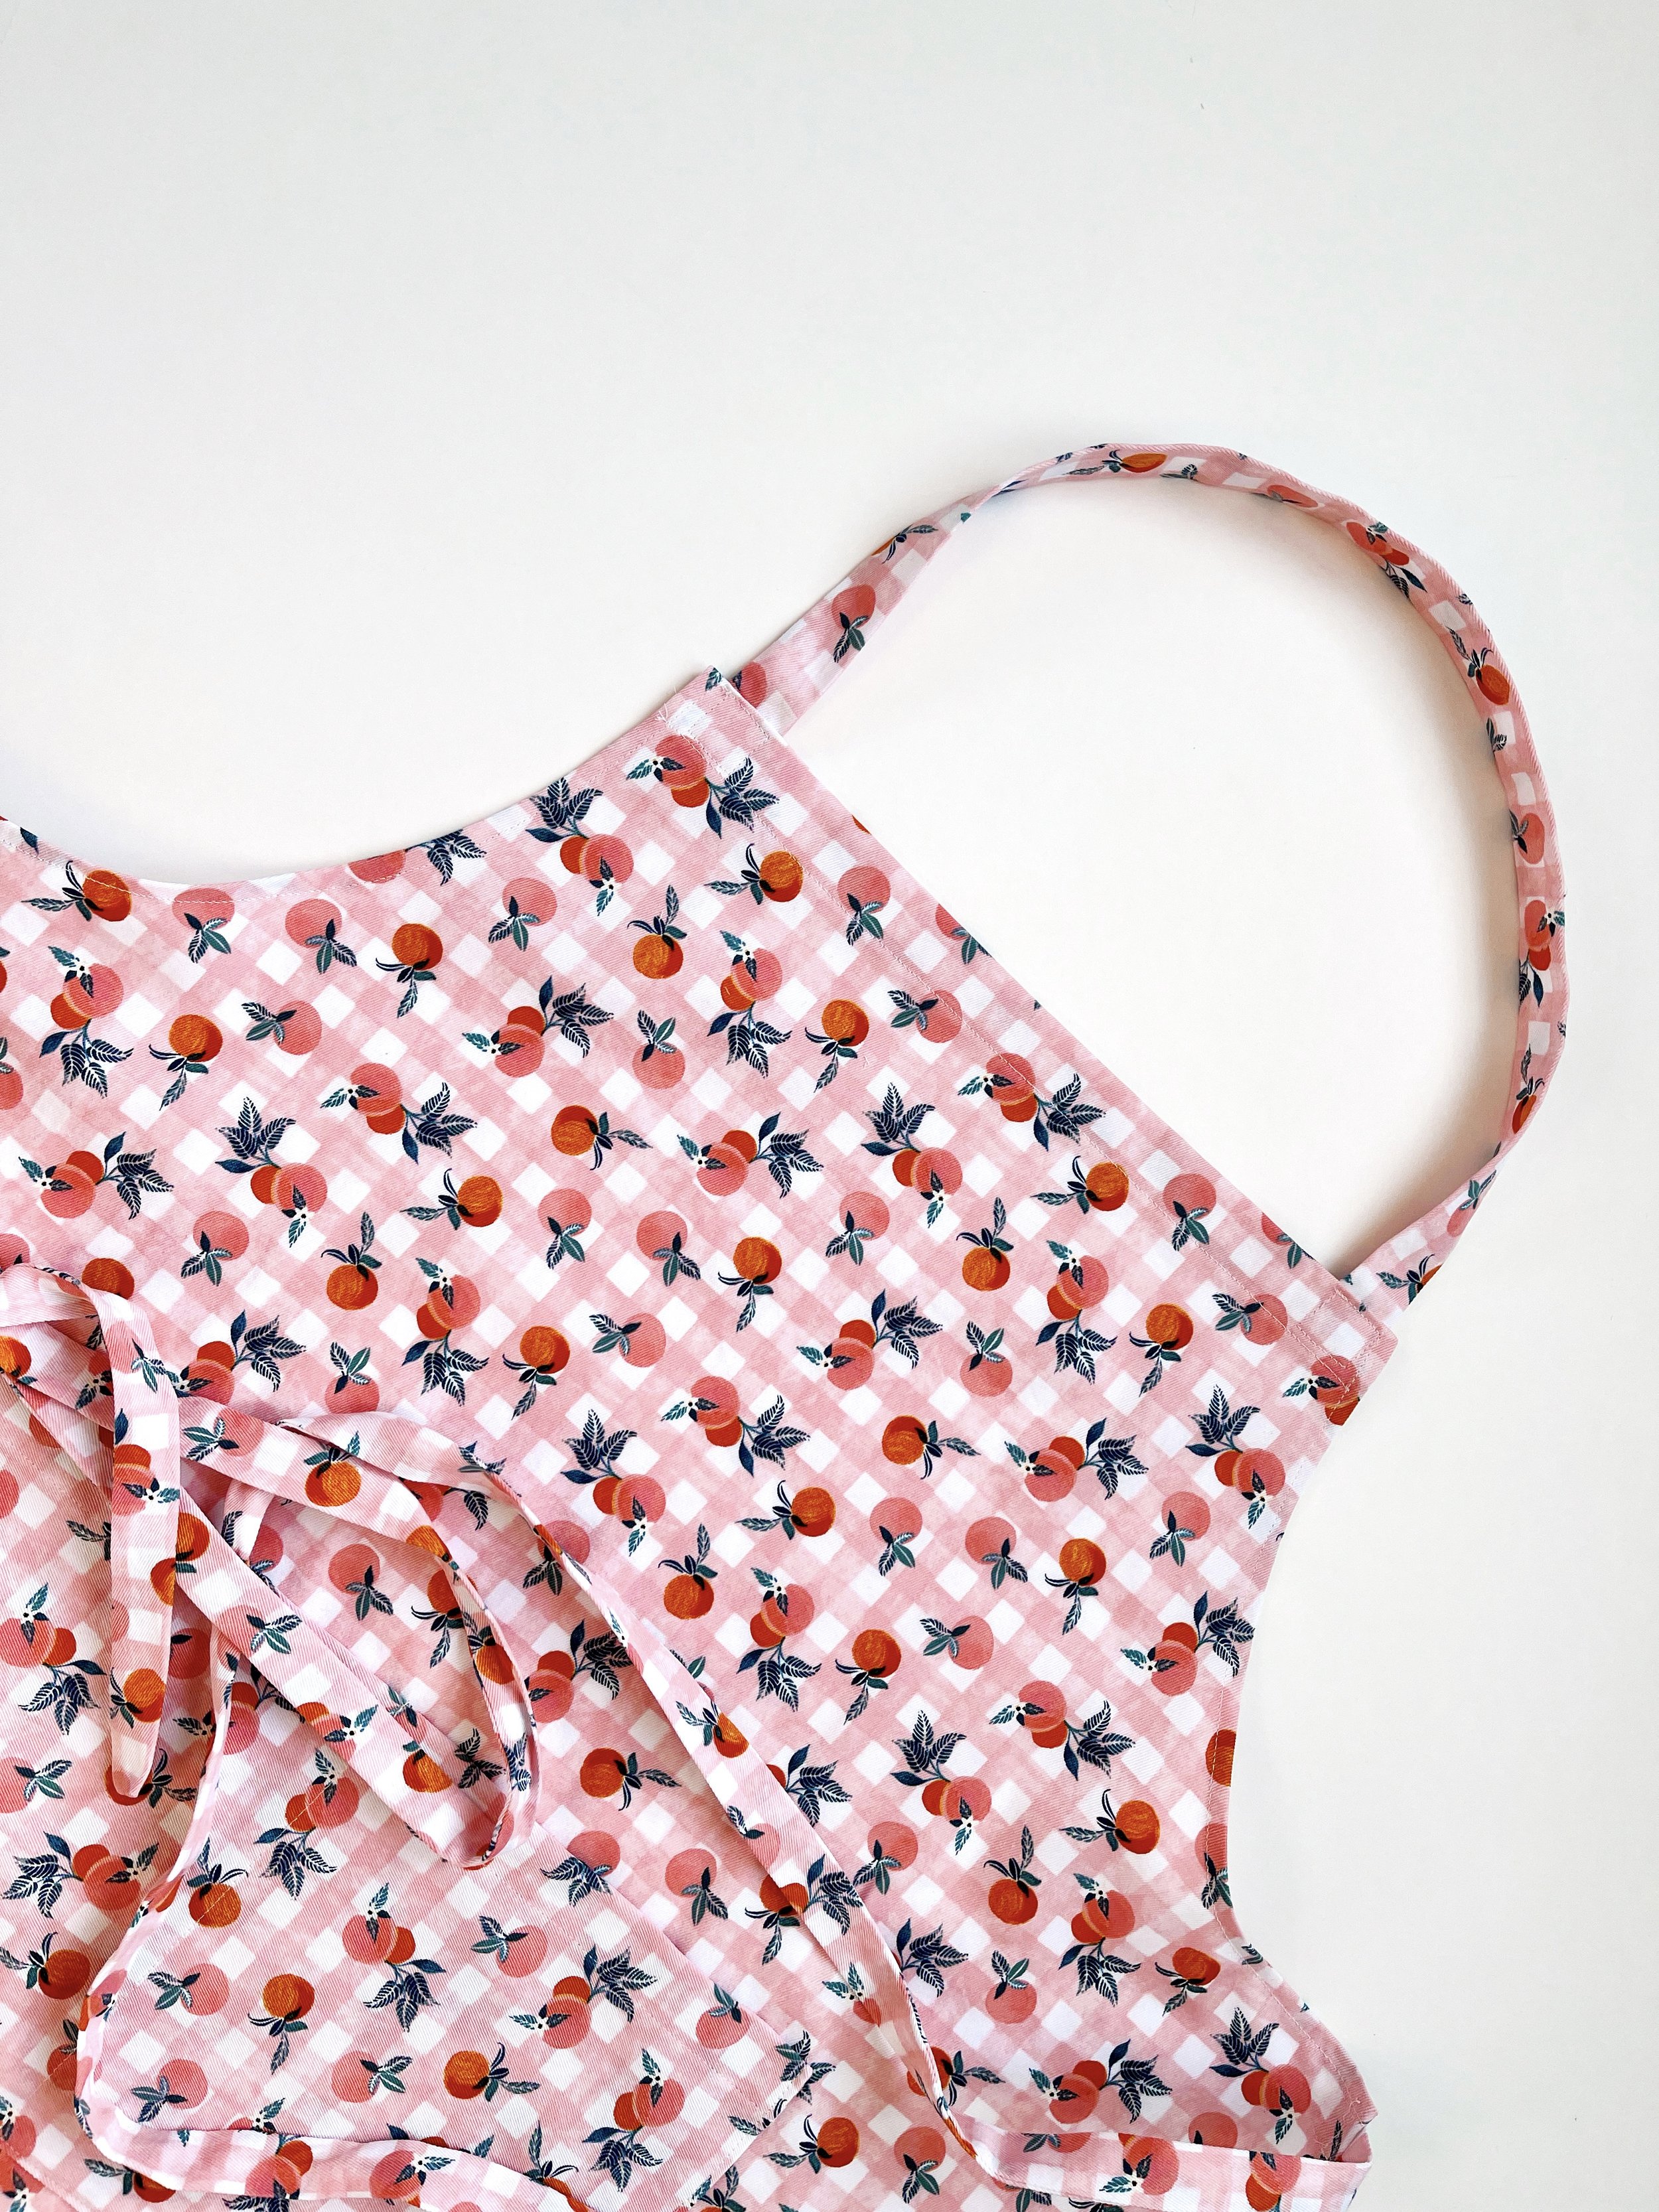 How to Sew an Easy Apron 